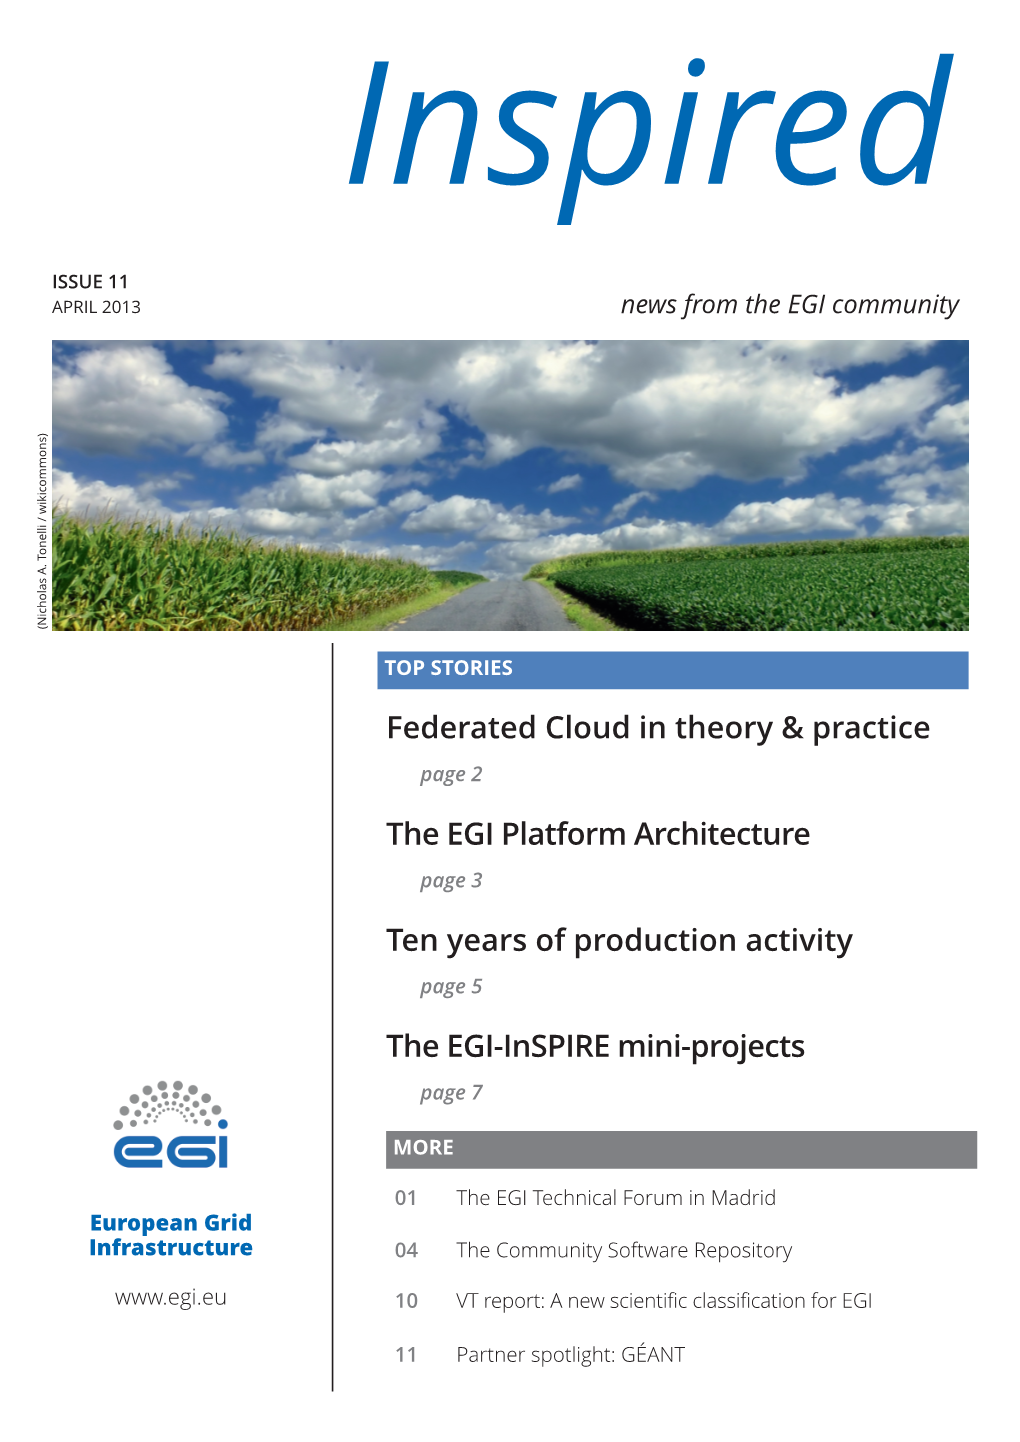 Federated Cloud in Theory & Practice Ten Years of Production Activity the EGI Platform Architecture the EGI-Inspire Mini-Pro